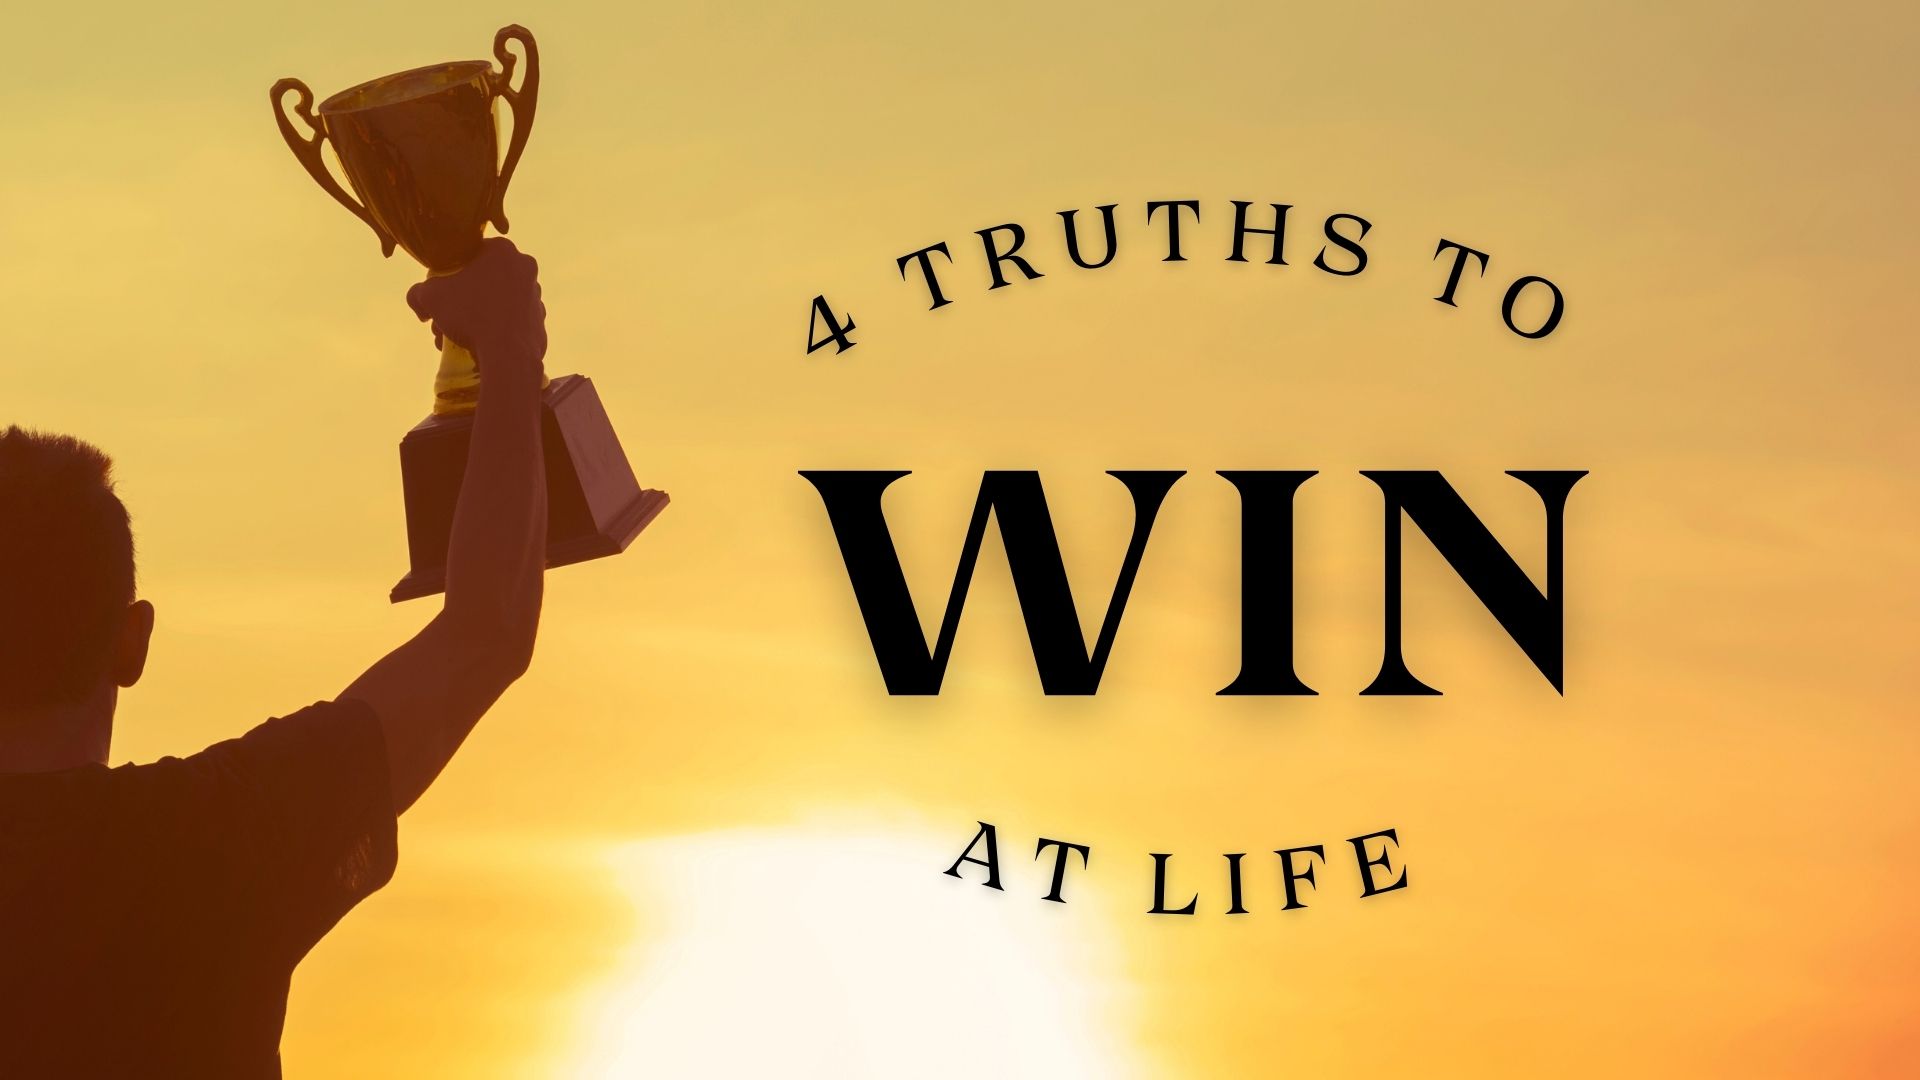 4 Truths to Win at Life